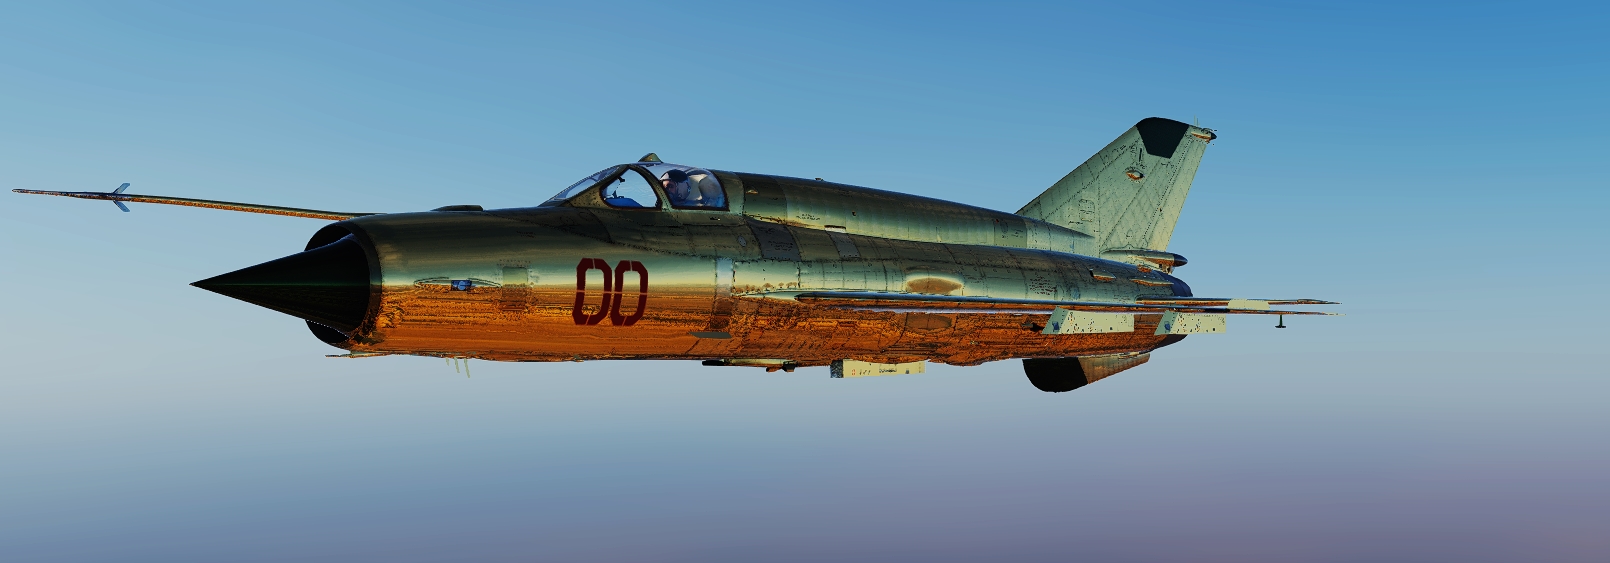 GOLDEN MIG21 (outdated)